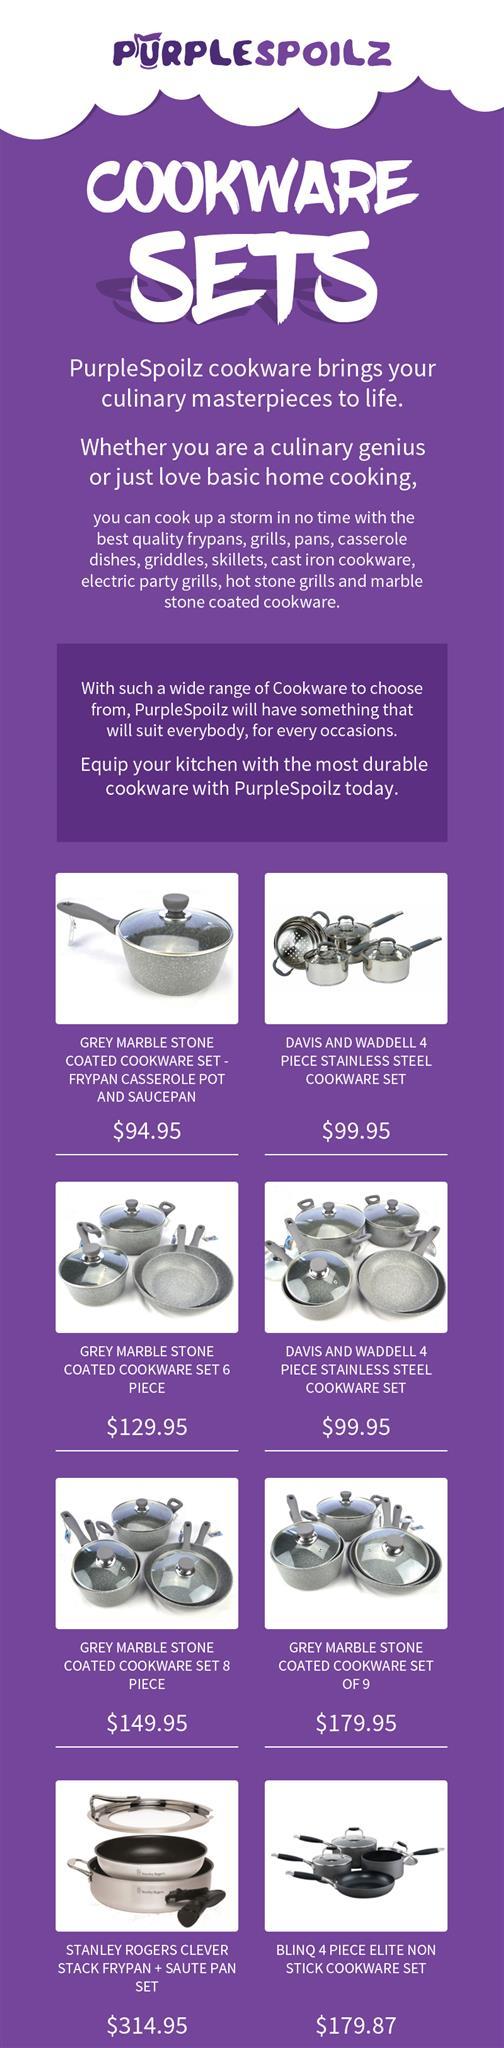 Shop Quality Cookware Sets Online from PurpleSpoilz